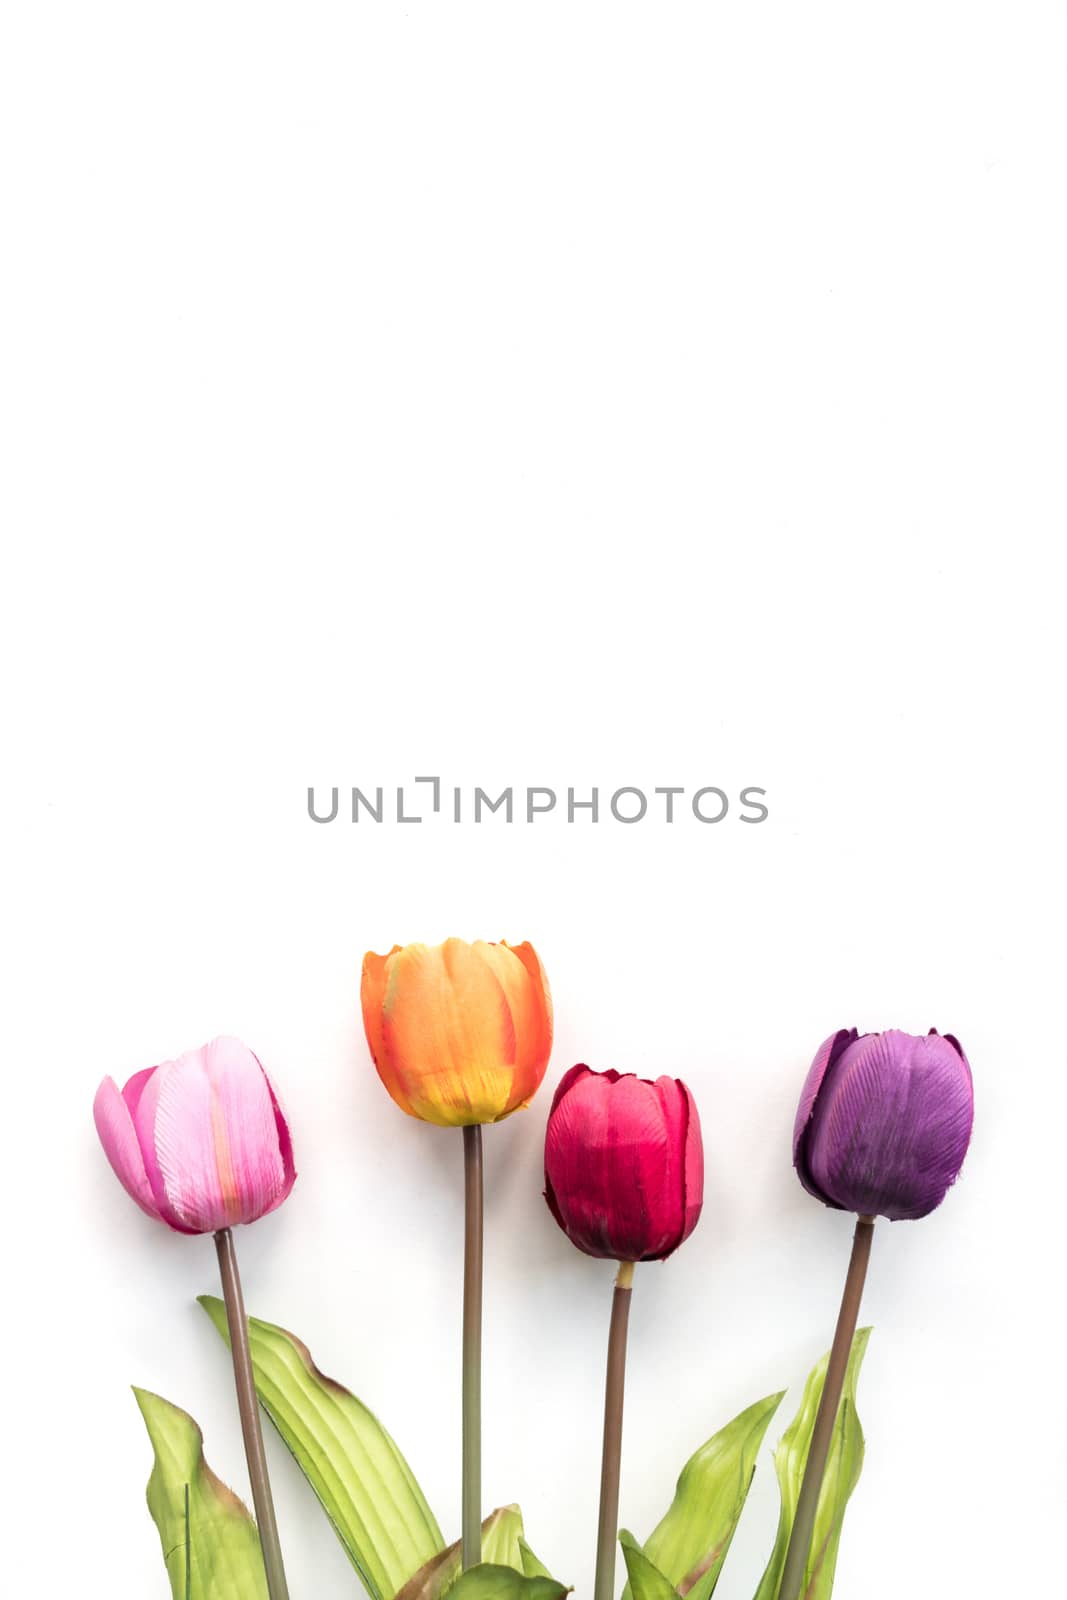 Colorful Tulip flowers on a white background, free space for text by ronnarong